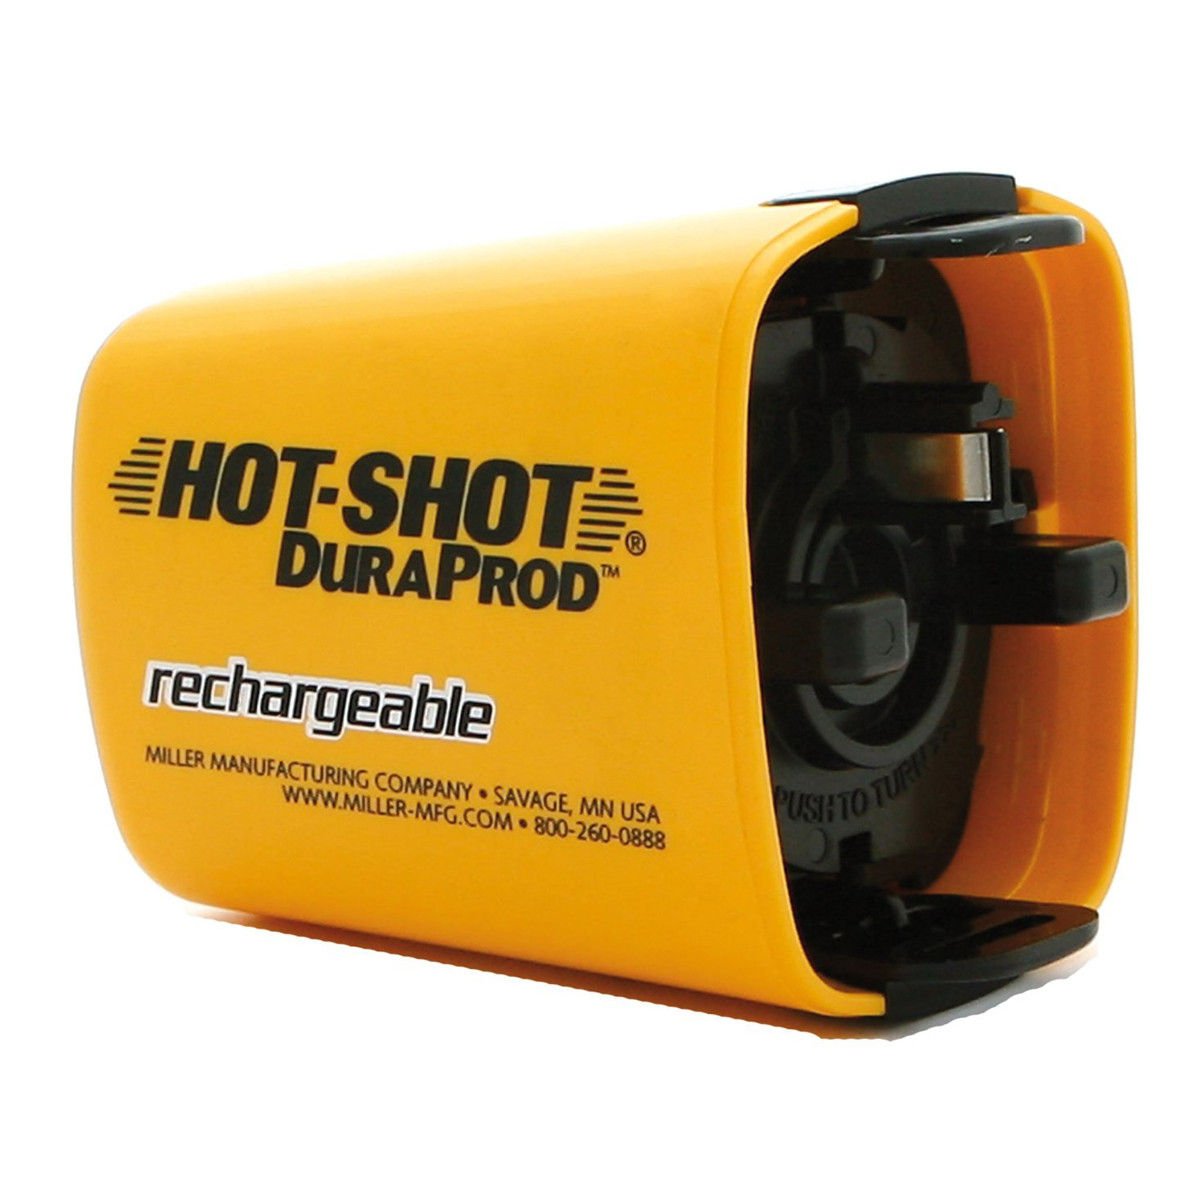 DuraProd Rechargeable Battery Pack